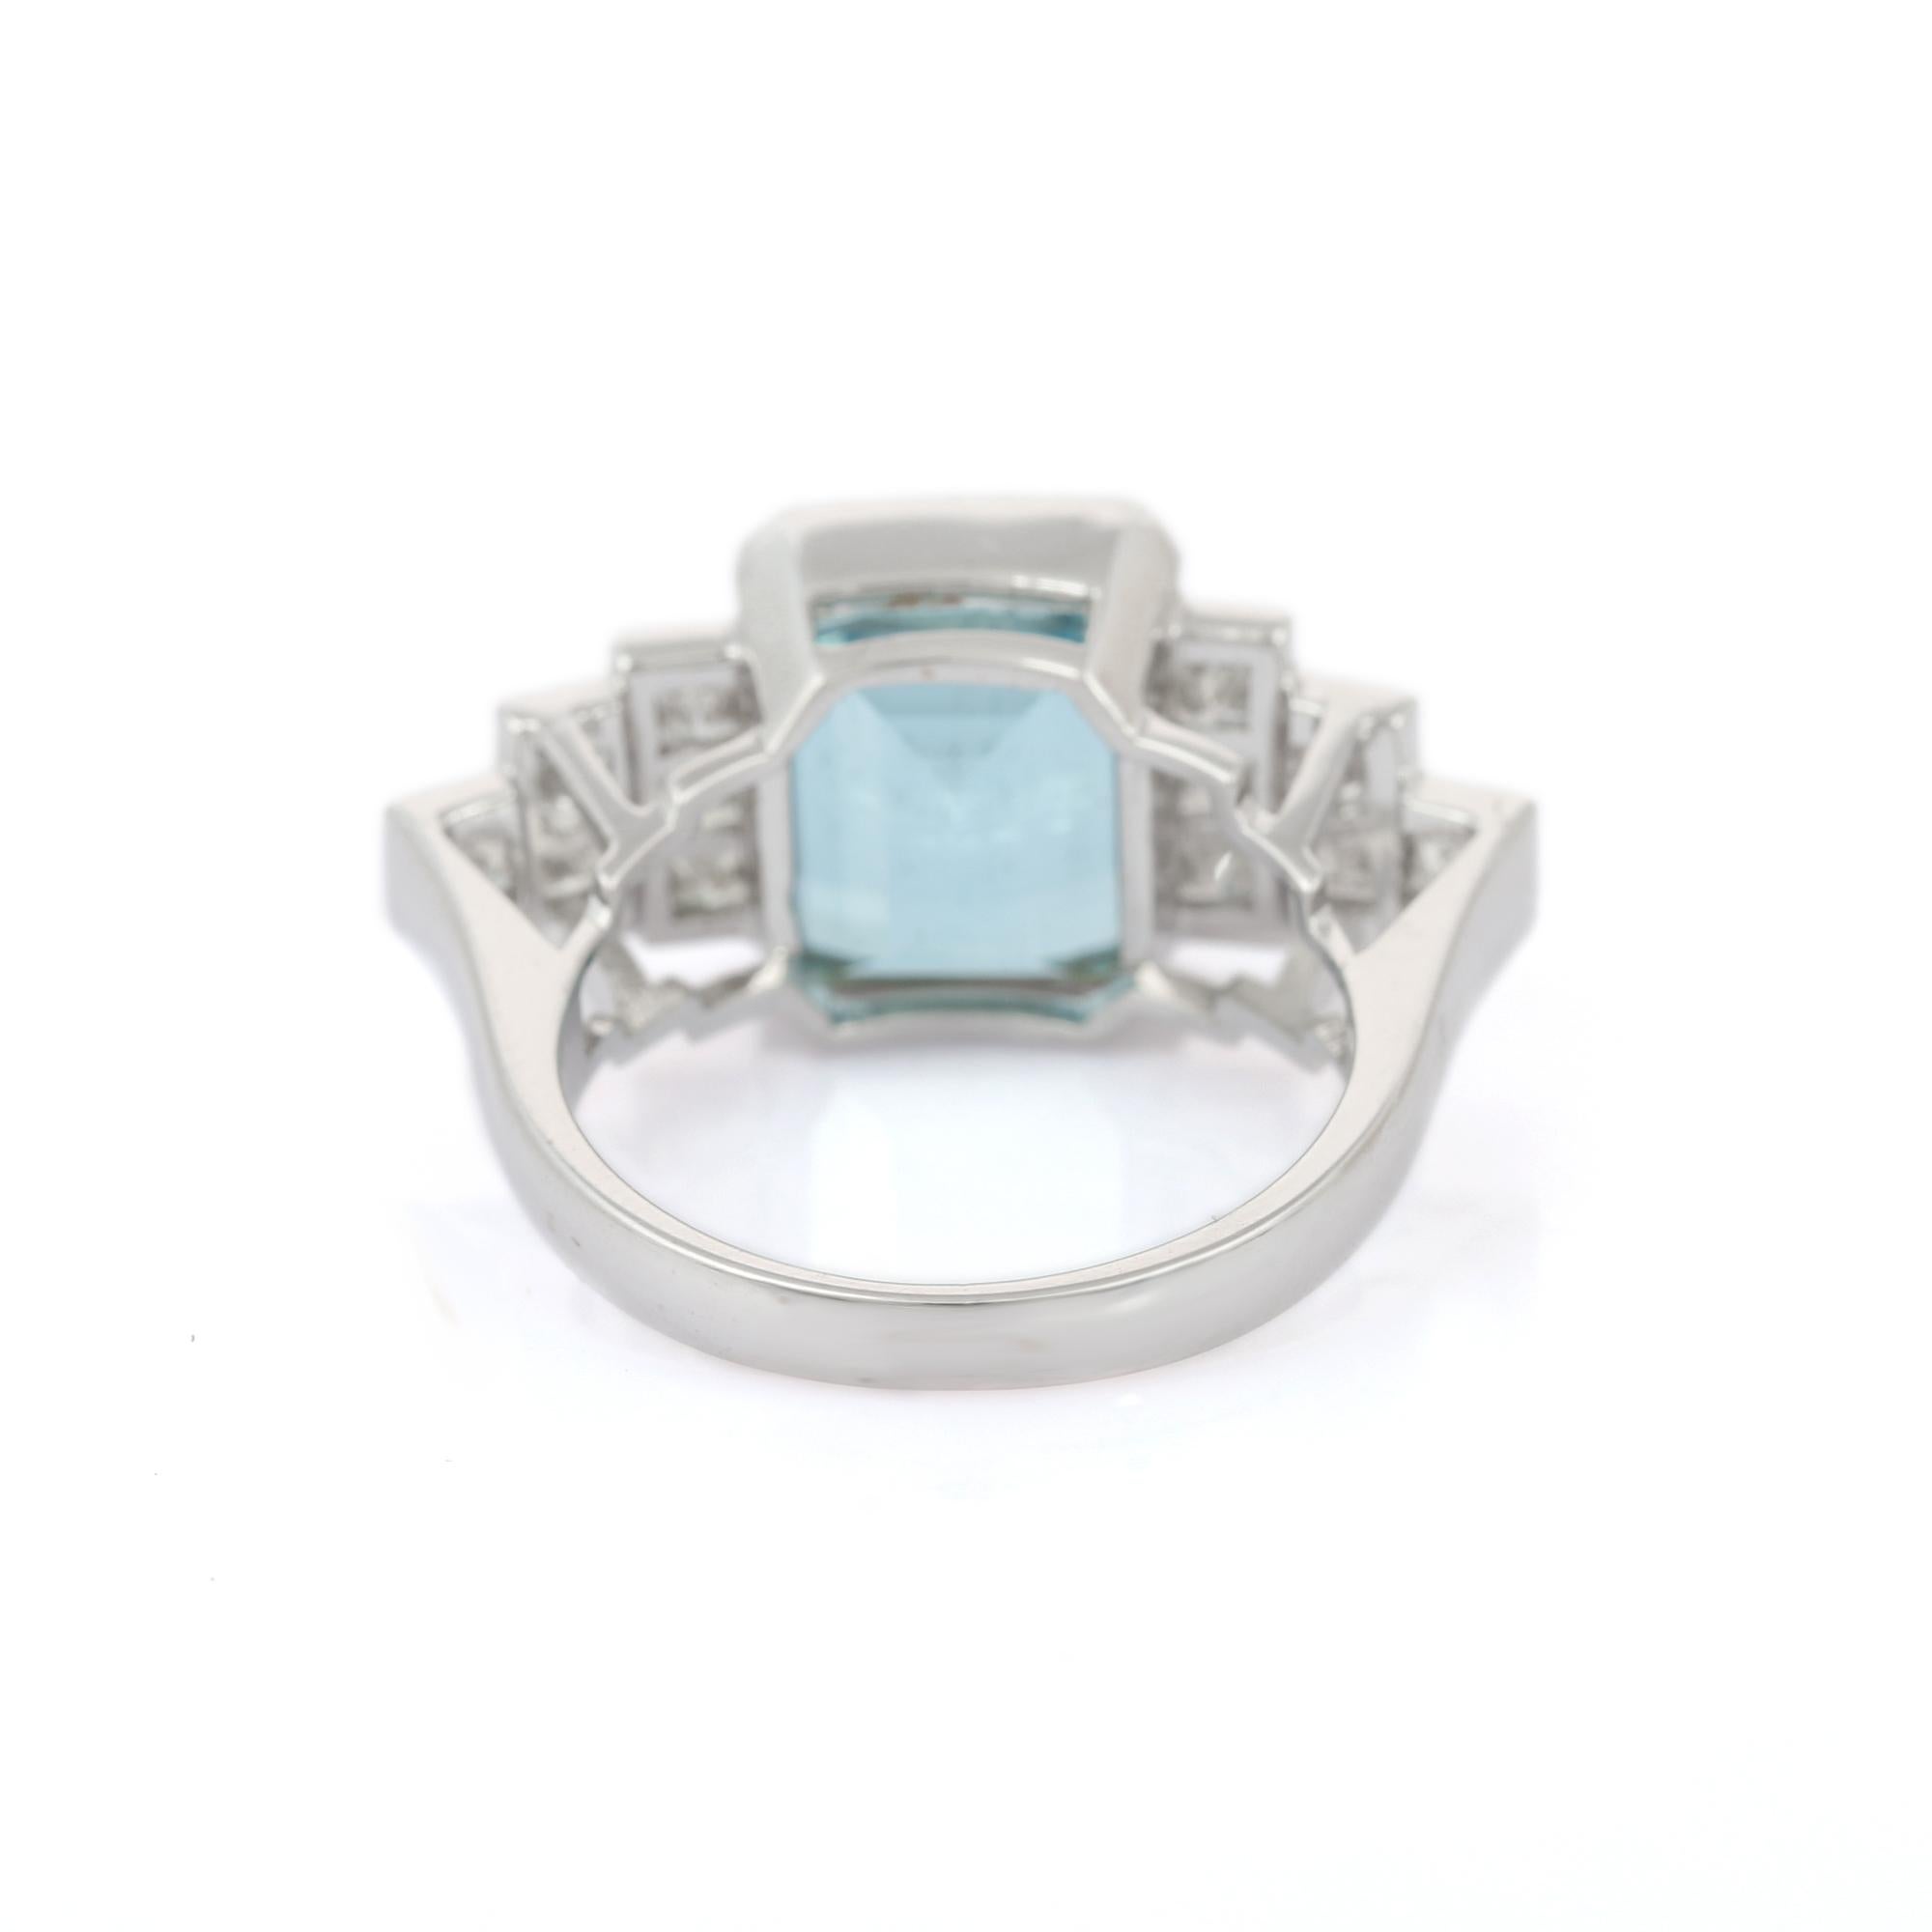 For Sale:  5.79 Carats Aquamarine and Diamond Ring in 18K White Gold 4